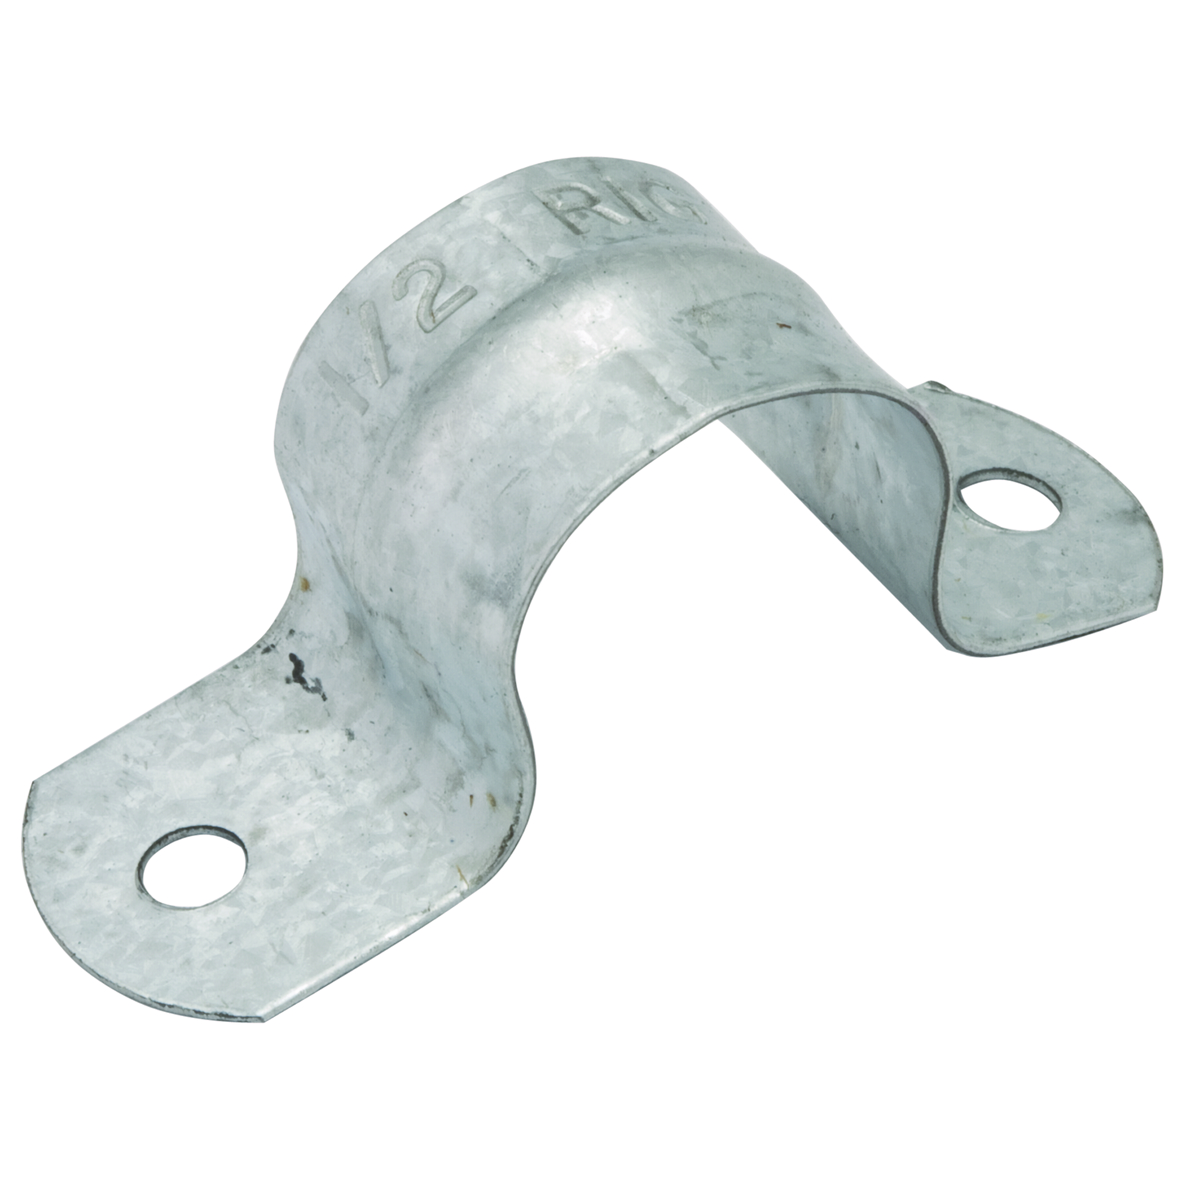 Two Hole Straps Stamped Steel, 2 In. Trade Size RGD/IMC/FLEX 2-HOLE 2 IN